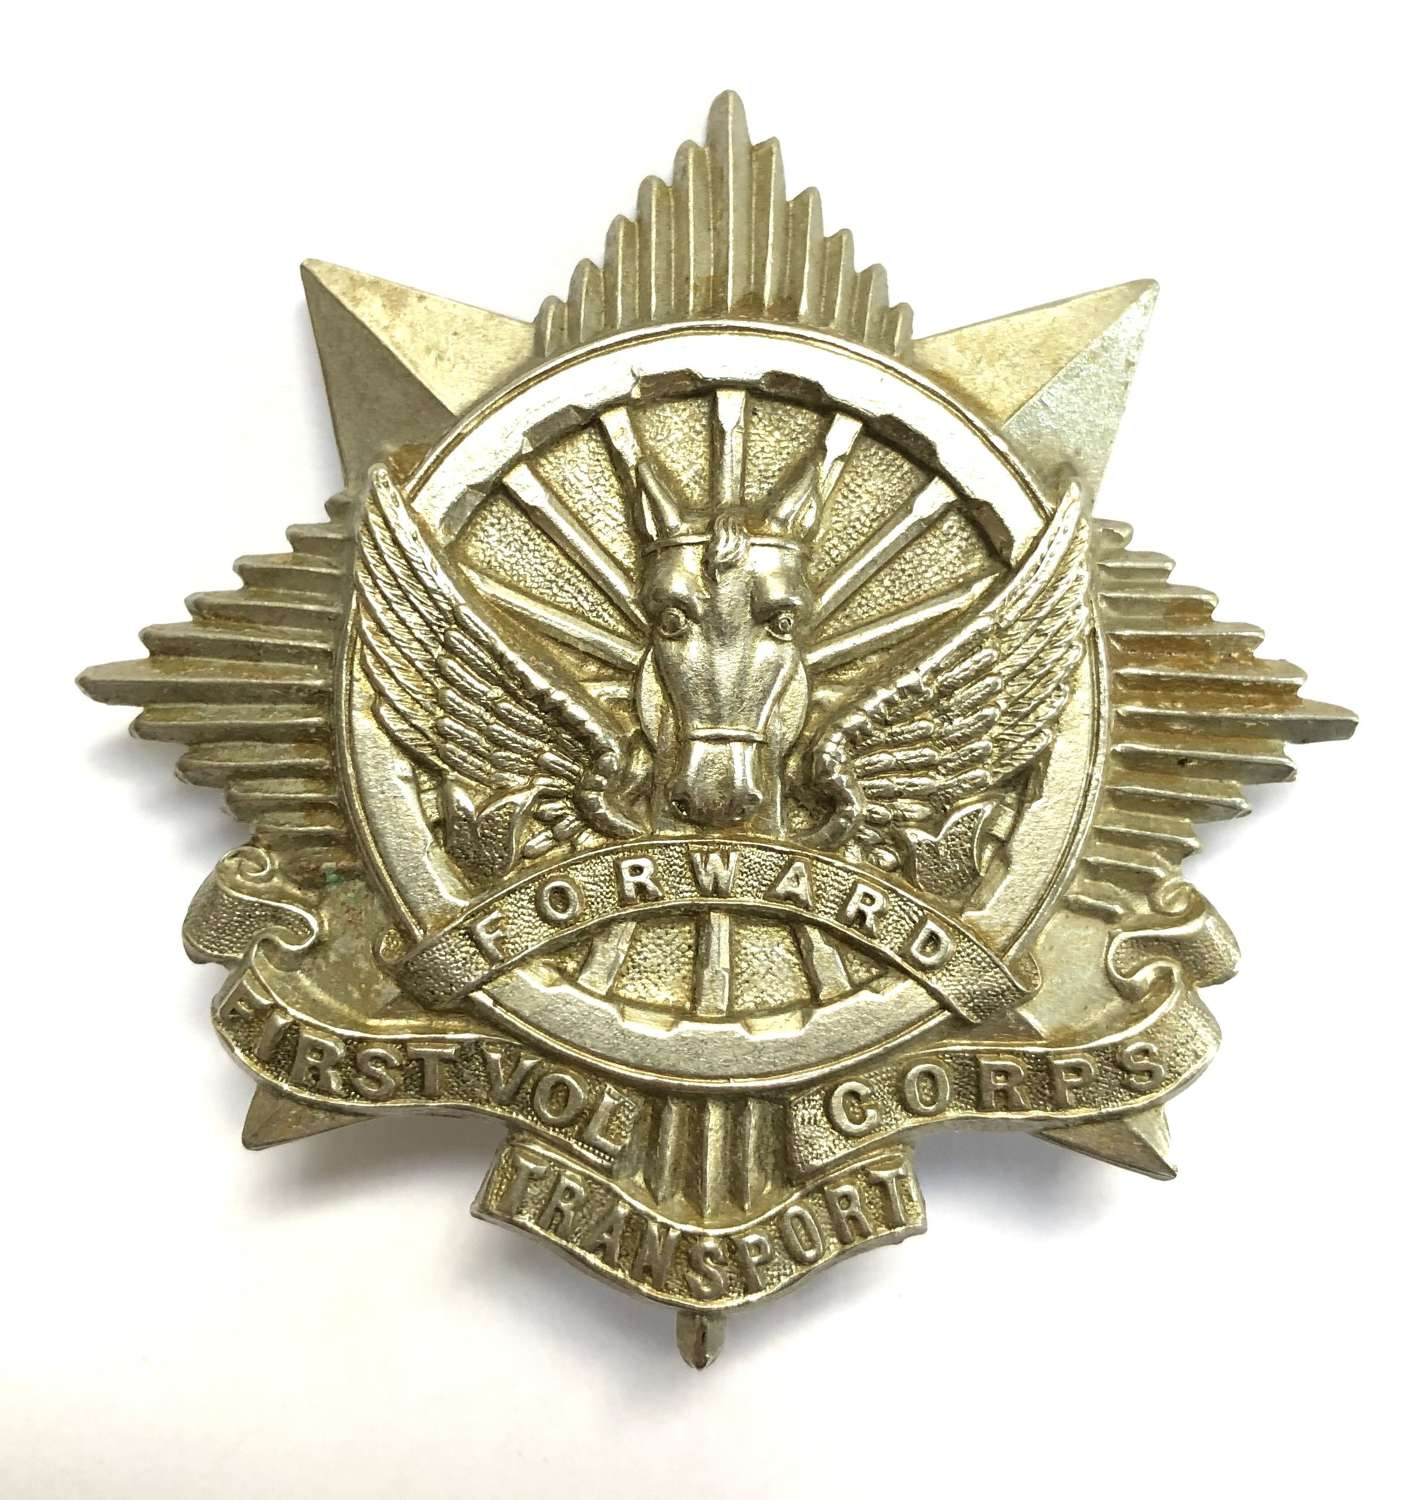 South Africa. First Volunteer Transport Corps badge circa 1903-13